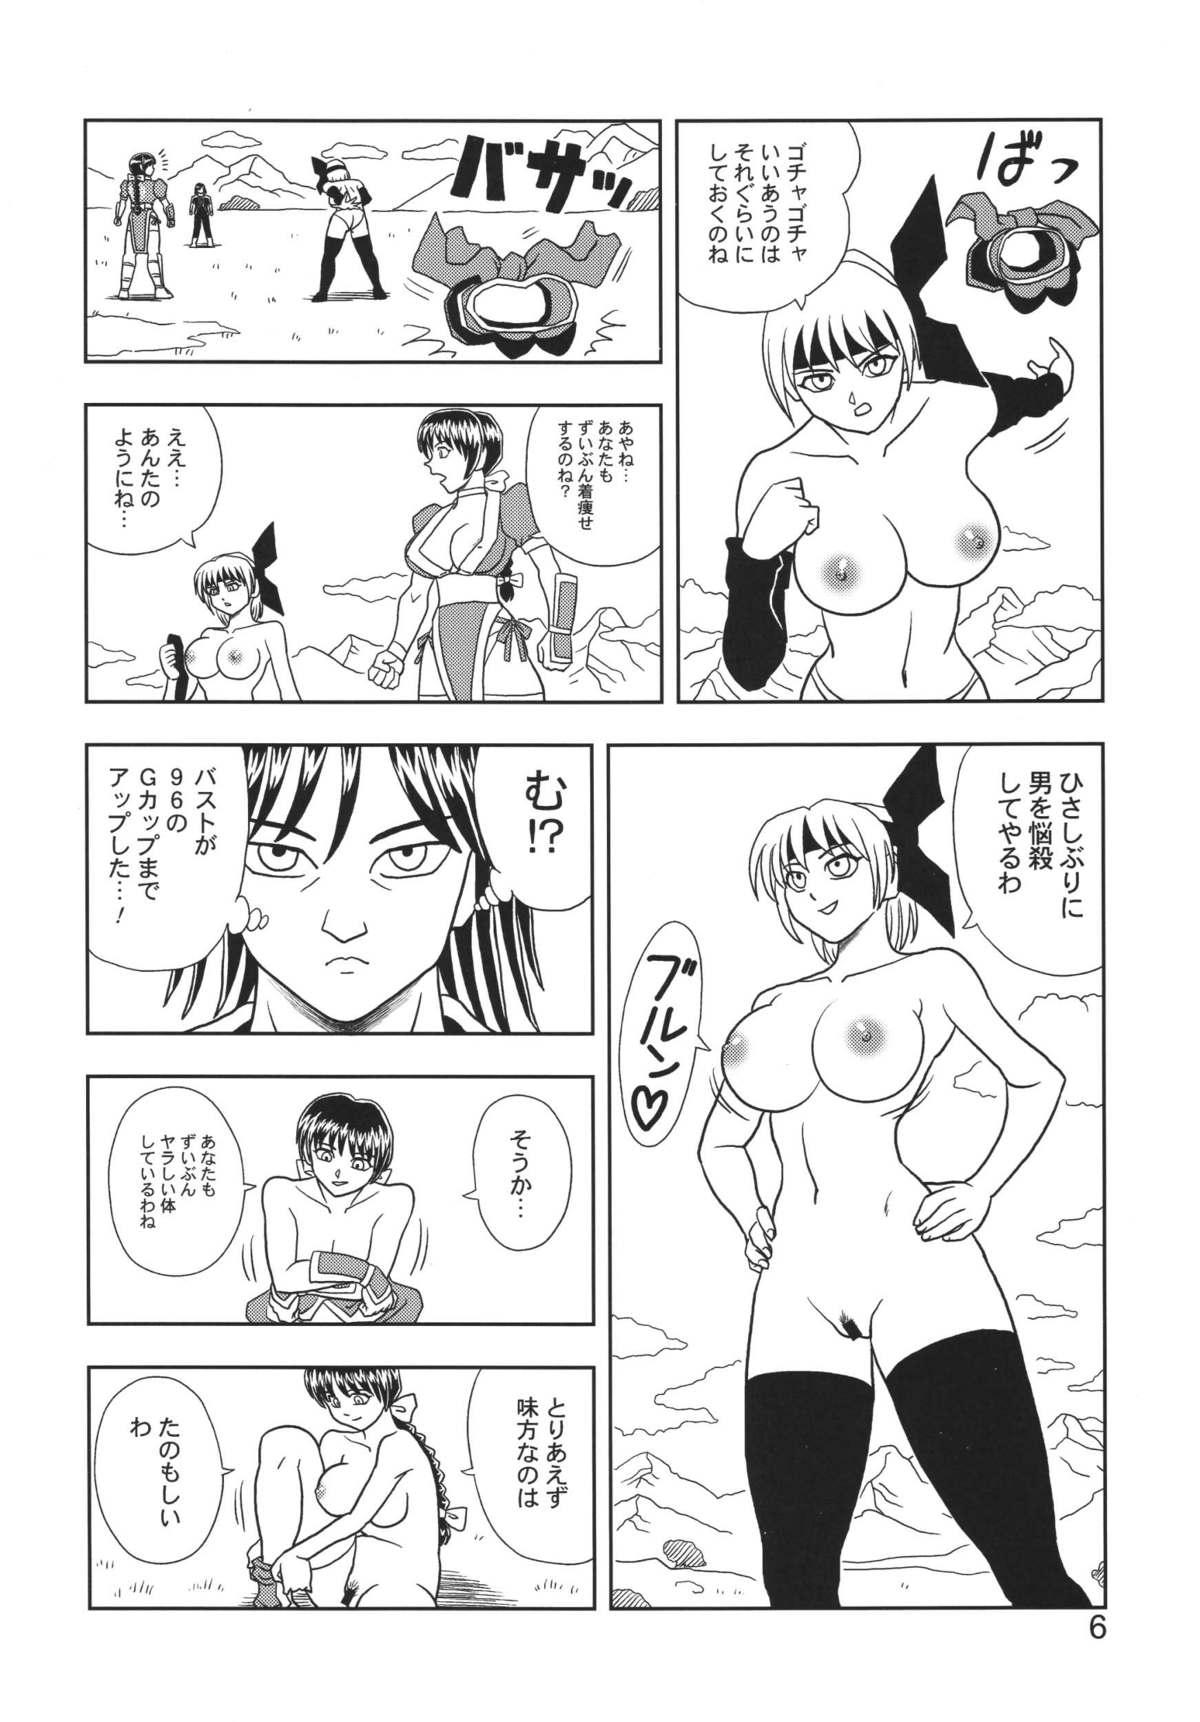 Ejaculation Kasumi or Ayane - Dead or alive Analplay - Page 6